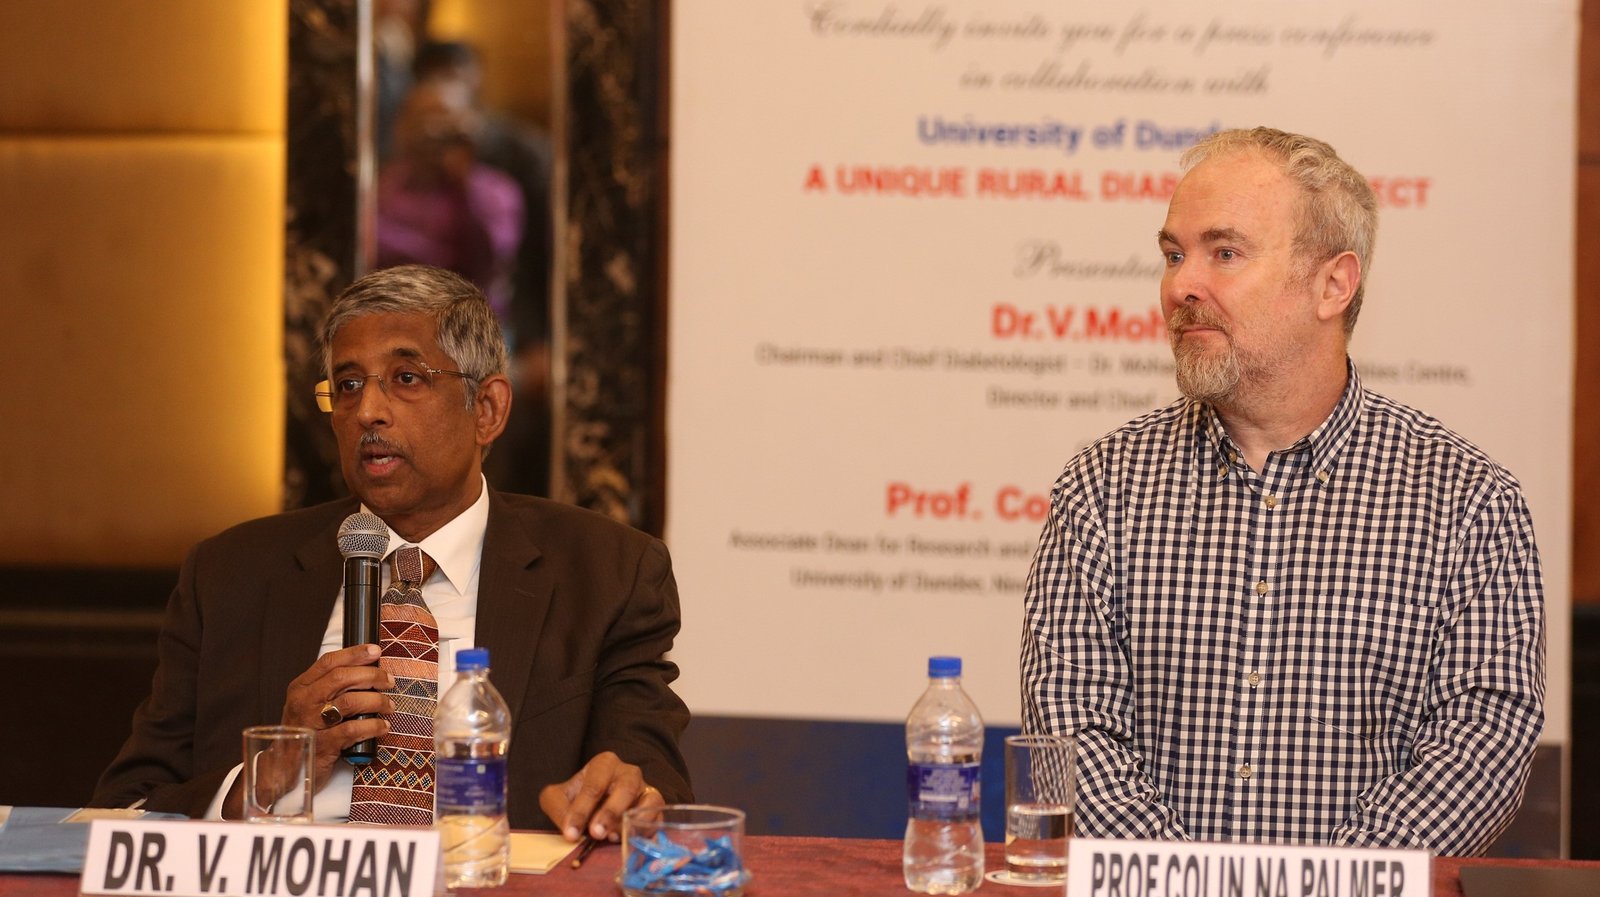 Dr.V.Mohan, Chairman and Chief Diabetologist – Dr. Mohan’s Diabetes Specialities Centre and Director MDRF and Professor Colin NA  Palmer, Associate Dean for Research and Chair of Pharmacogenomics, School of Medicine